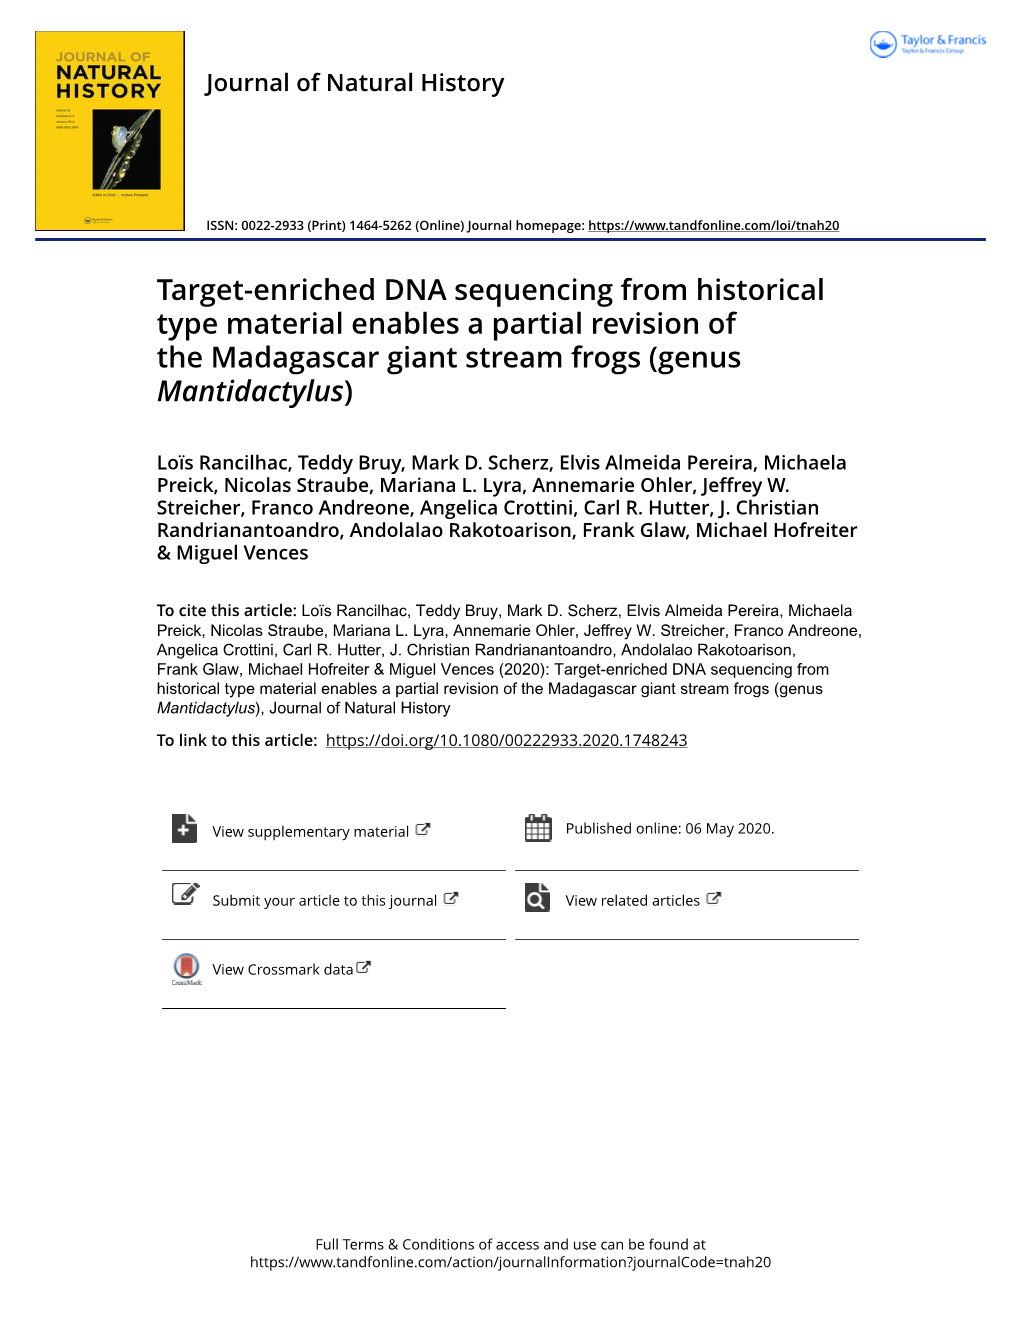 Target-Enriched DNA Sequencing from Historical Type Material Enables a Partial Revision of the Madagascar Giant Stream Frogs (Genus Mantidactylus)